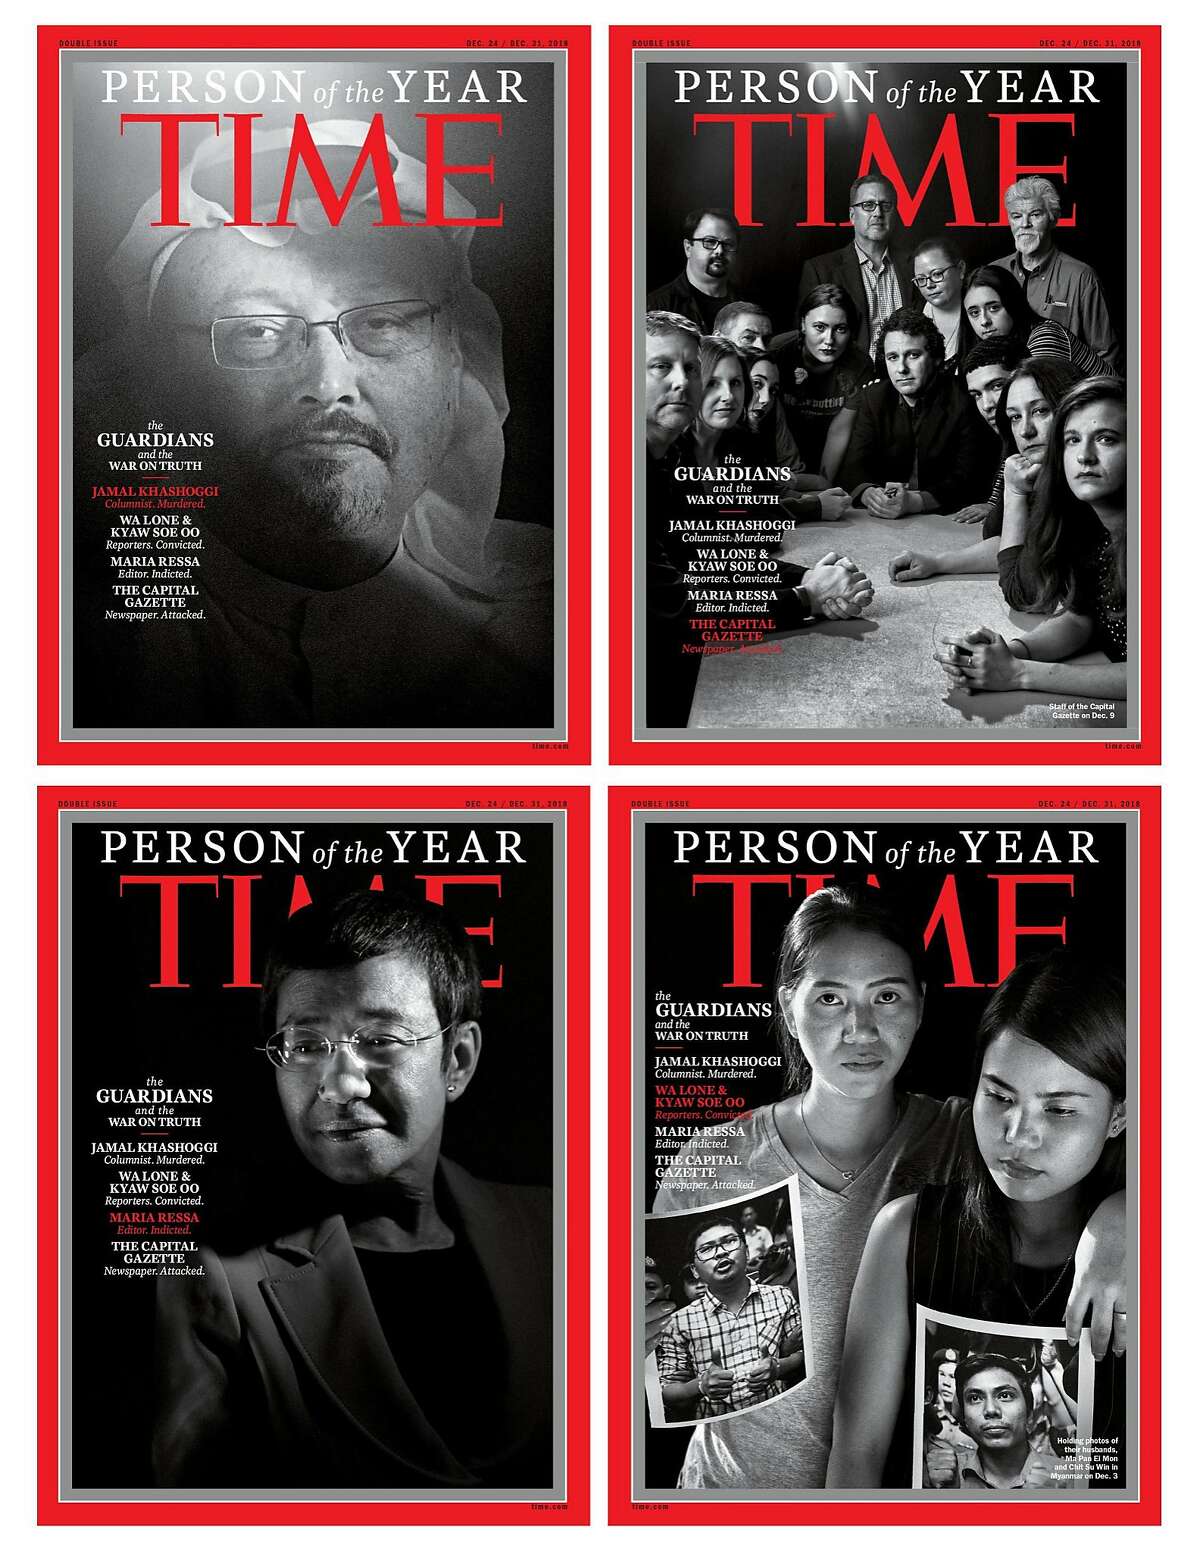 Time magazine has chosen ''The Guardians,'' a group of journalists who have been targeted for their work, as Person of the Year. All were photographed by Moises Saman/Magnum for the magazine. TIME produced a series of four black and white covers to highlight what the magazine calls ''the War on Truth.'' The covers include Jamal Khashoggi, the Washington Post contributor who was killed at the Saudi Arabian consulate in Istanbul. Marking the first time that a Person of the Year is a deceased person. Another cover features Wa Lone and Kyaw Soe Oo, two Reuters journalists who were arrested in Myanmar while covering the killings of Rohingya Muslims. The two journalists are still in prison. Their wives were photographed for the cover. The journalists at the Capital Gazette are also included, from the Annapolis, Maryland newspaper where five employees were killed by a gunman. The fourth cover is Maria Ressa, chief executive of the Philippine news website Rappler. She has been recently indicted on tax evasion charges. Free speech and civil liberties groups claim this is part of a wide ranging crackdown on dissent by Philippine President Rodrigo Duterte's and his administration. (Moises Saman/Magnum/TIME/Zuma Press/TNS)